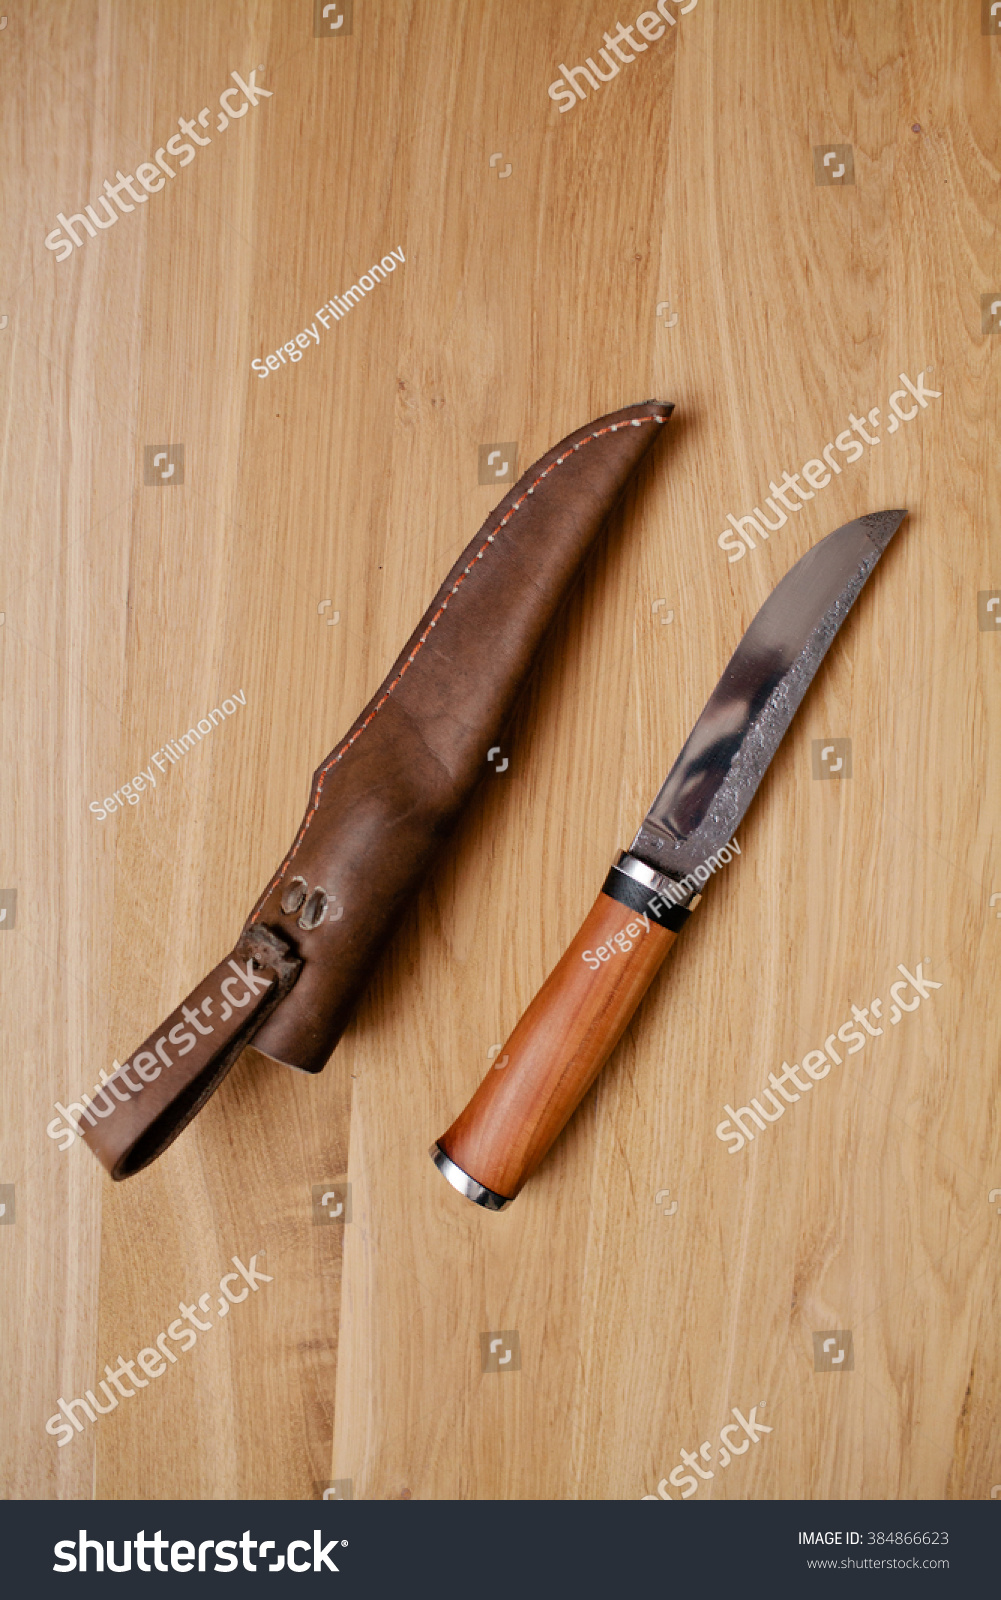 Knife with the wooden handle and a leather sheath #384866623